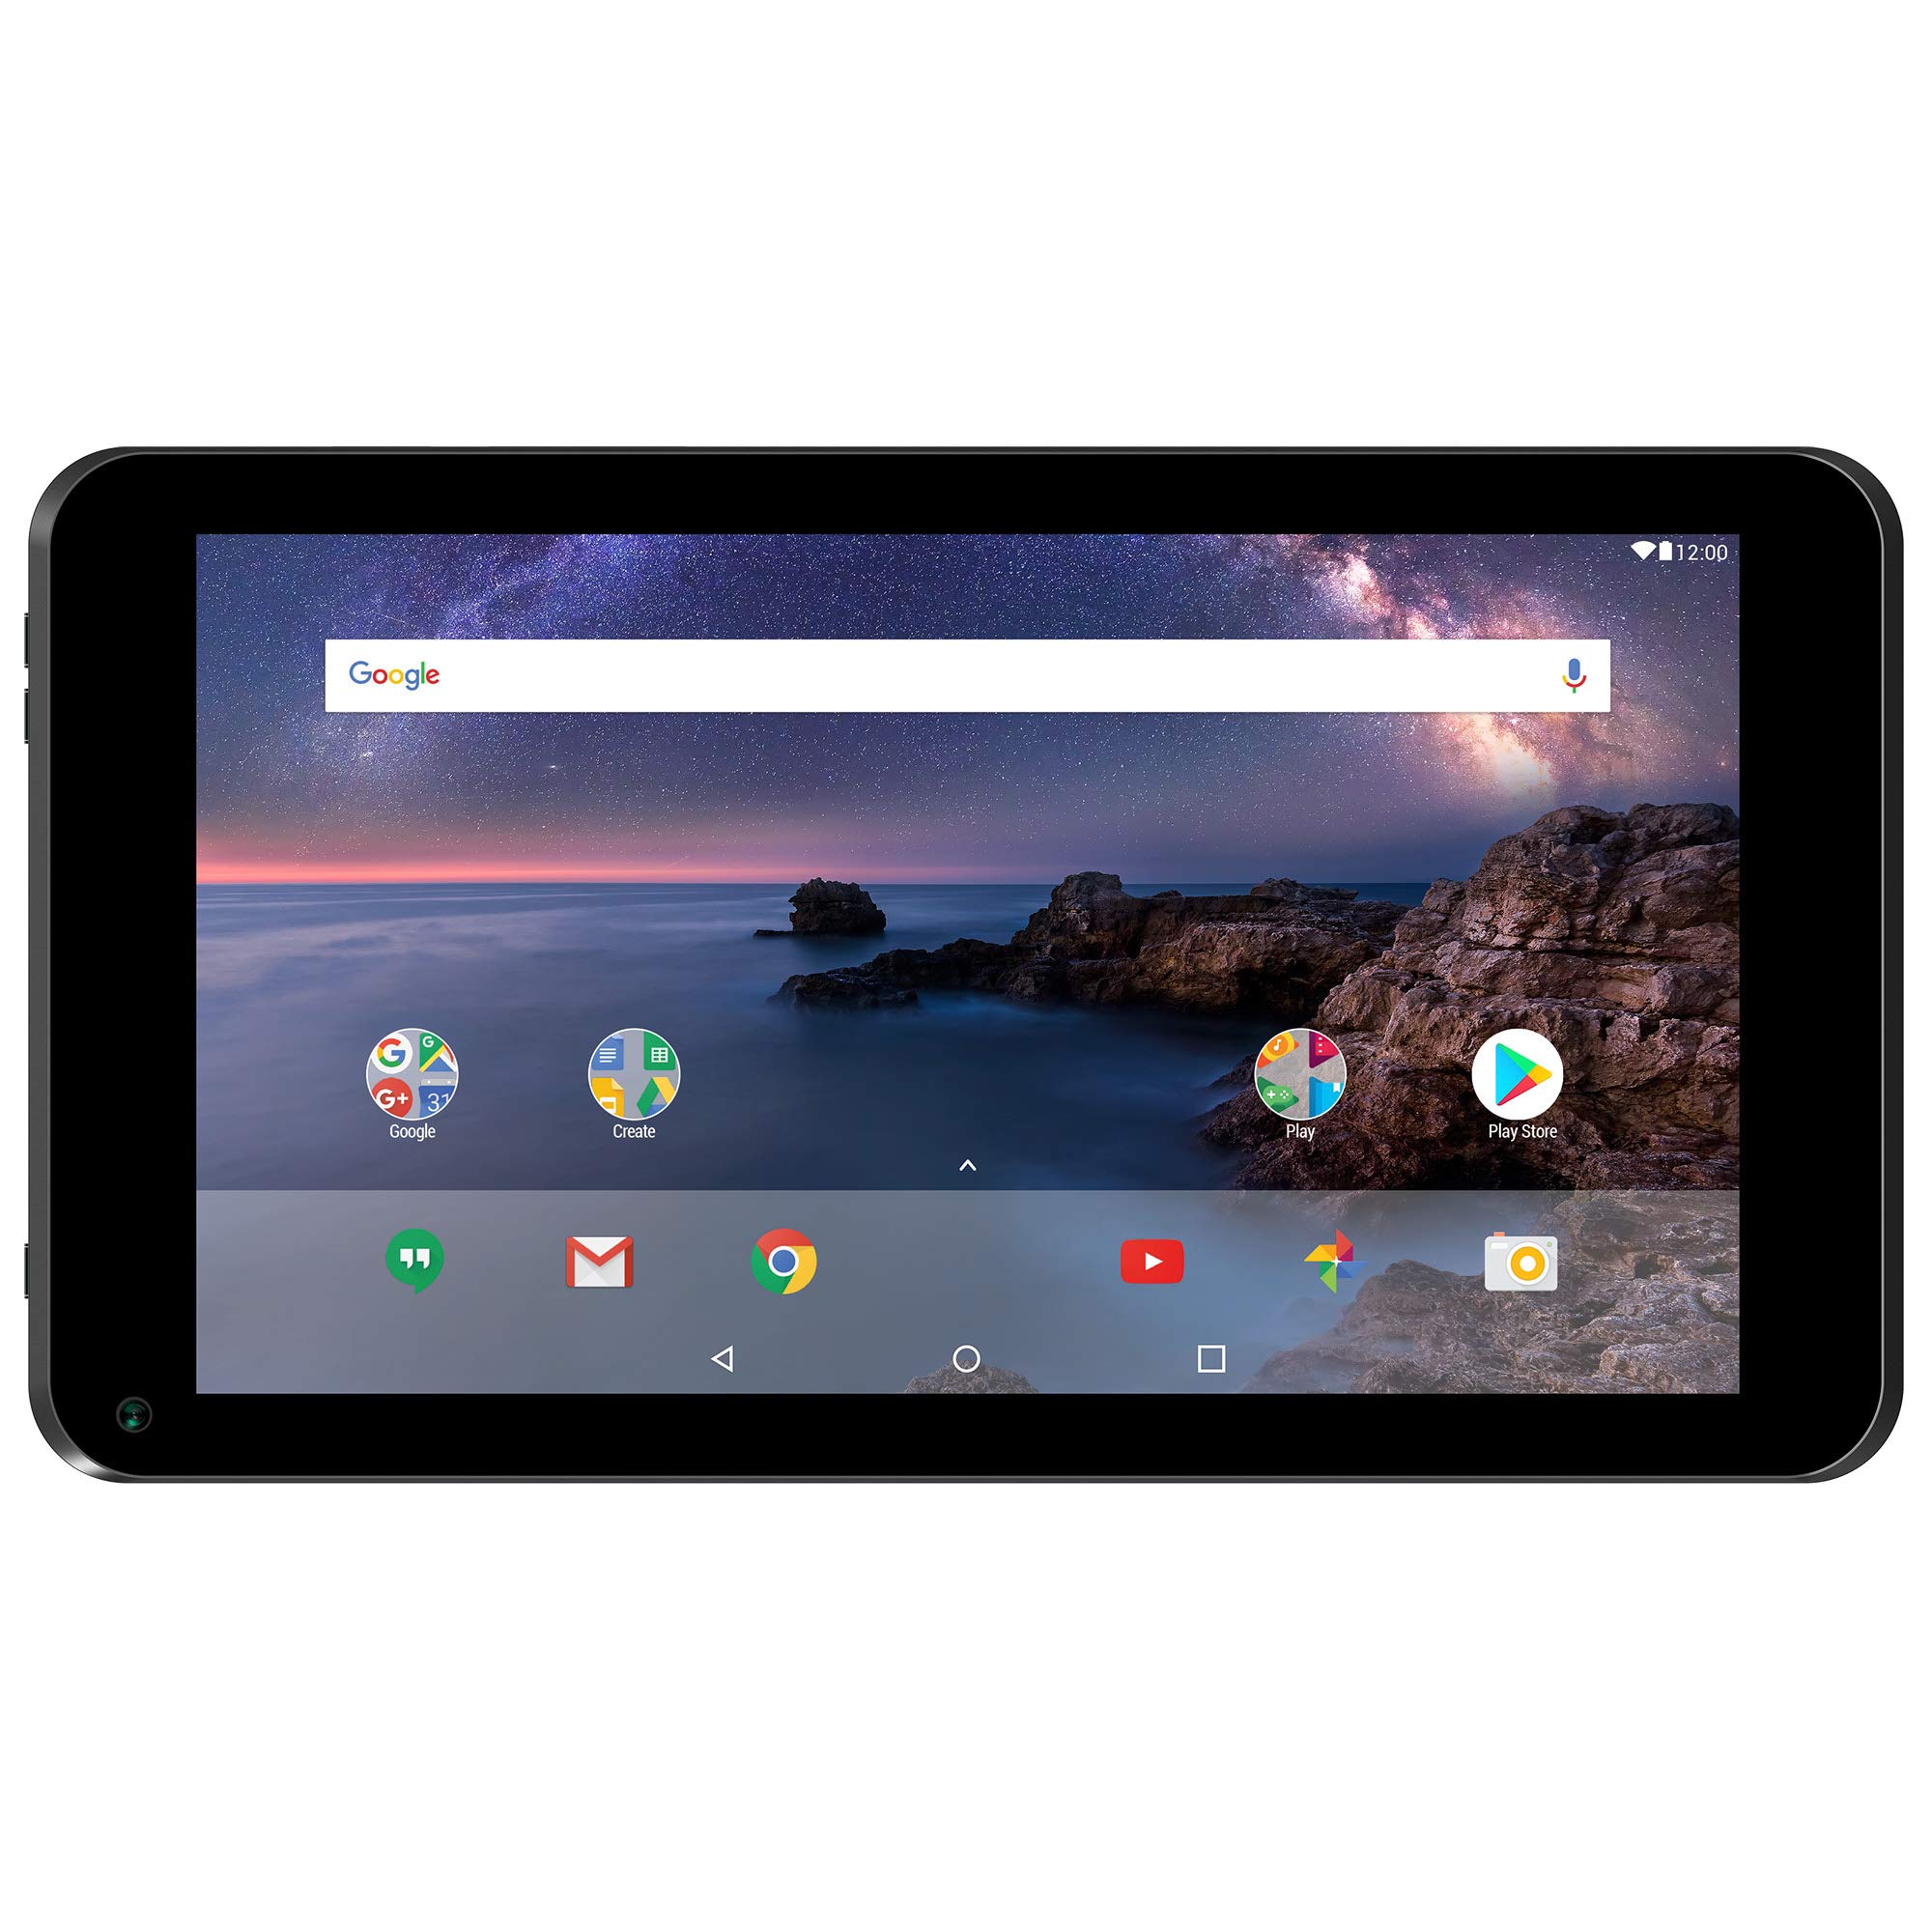 SmarTab 7 Android 7.1, Nougat Tablet with HD display, Quad-core processor & 16GB Storage